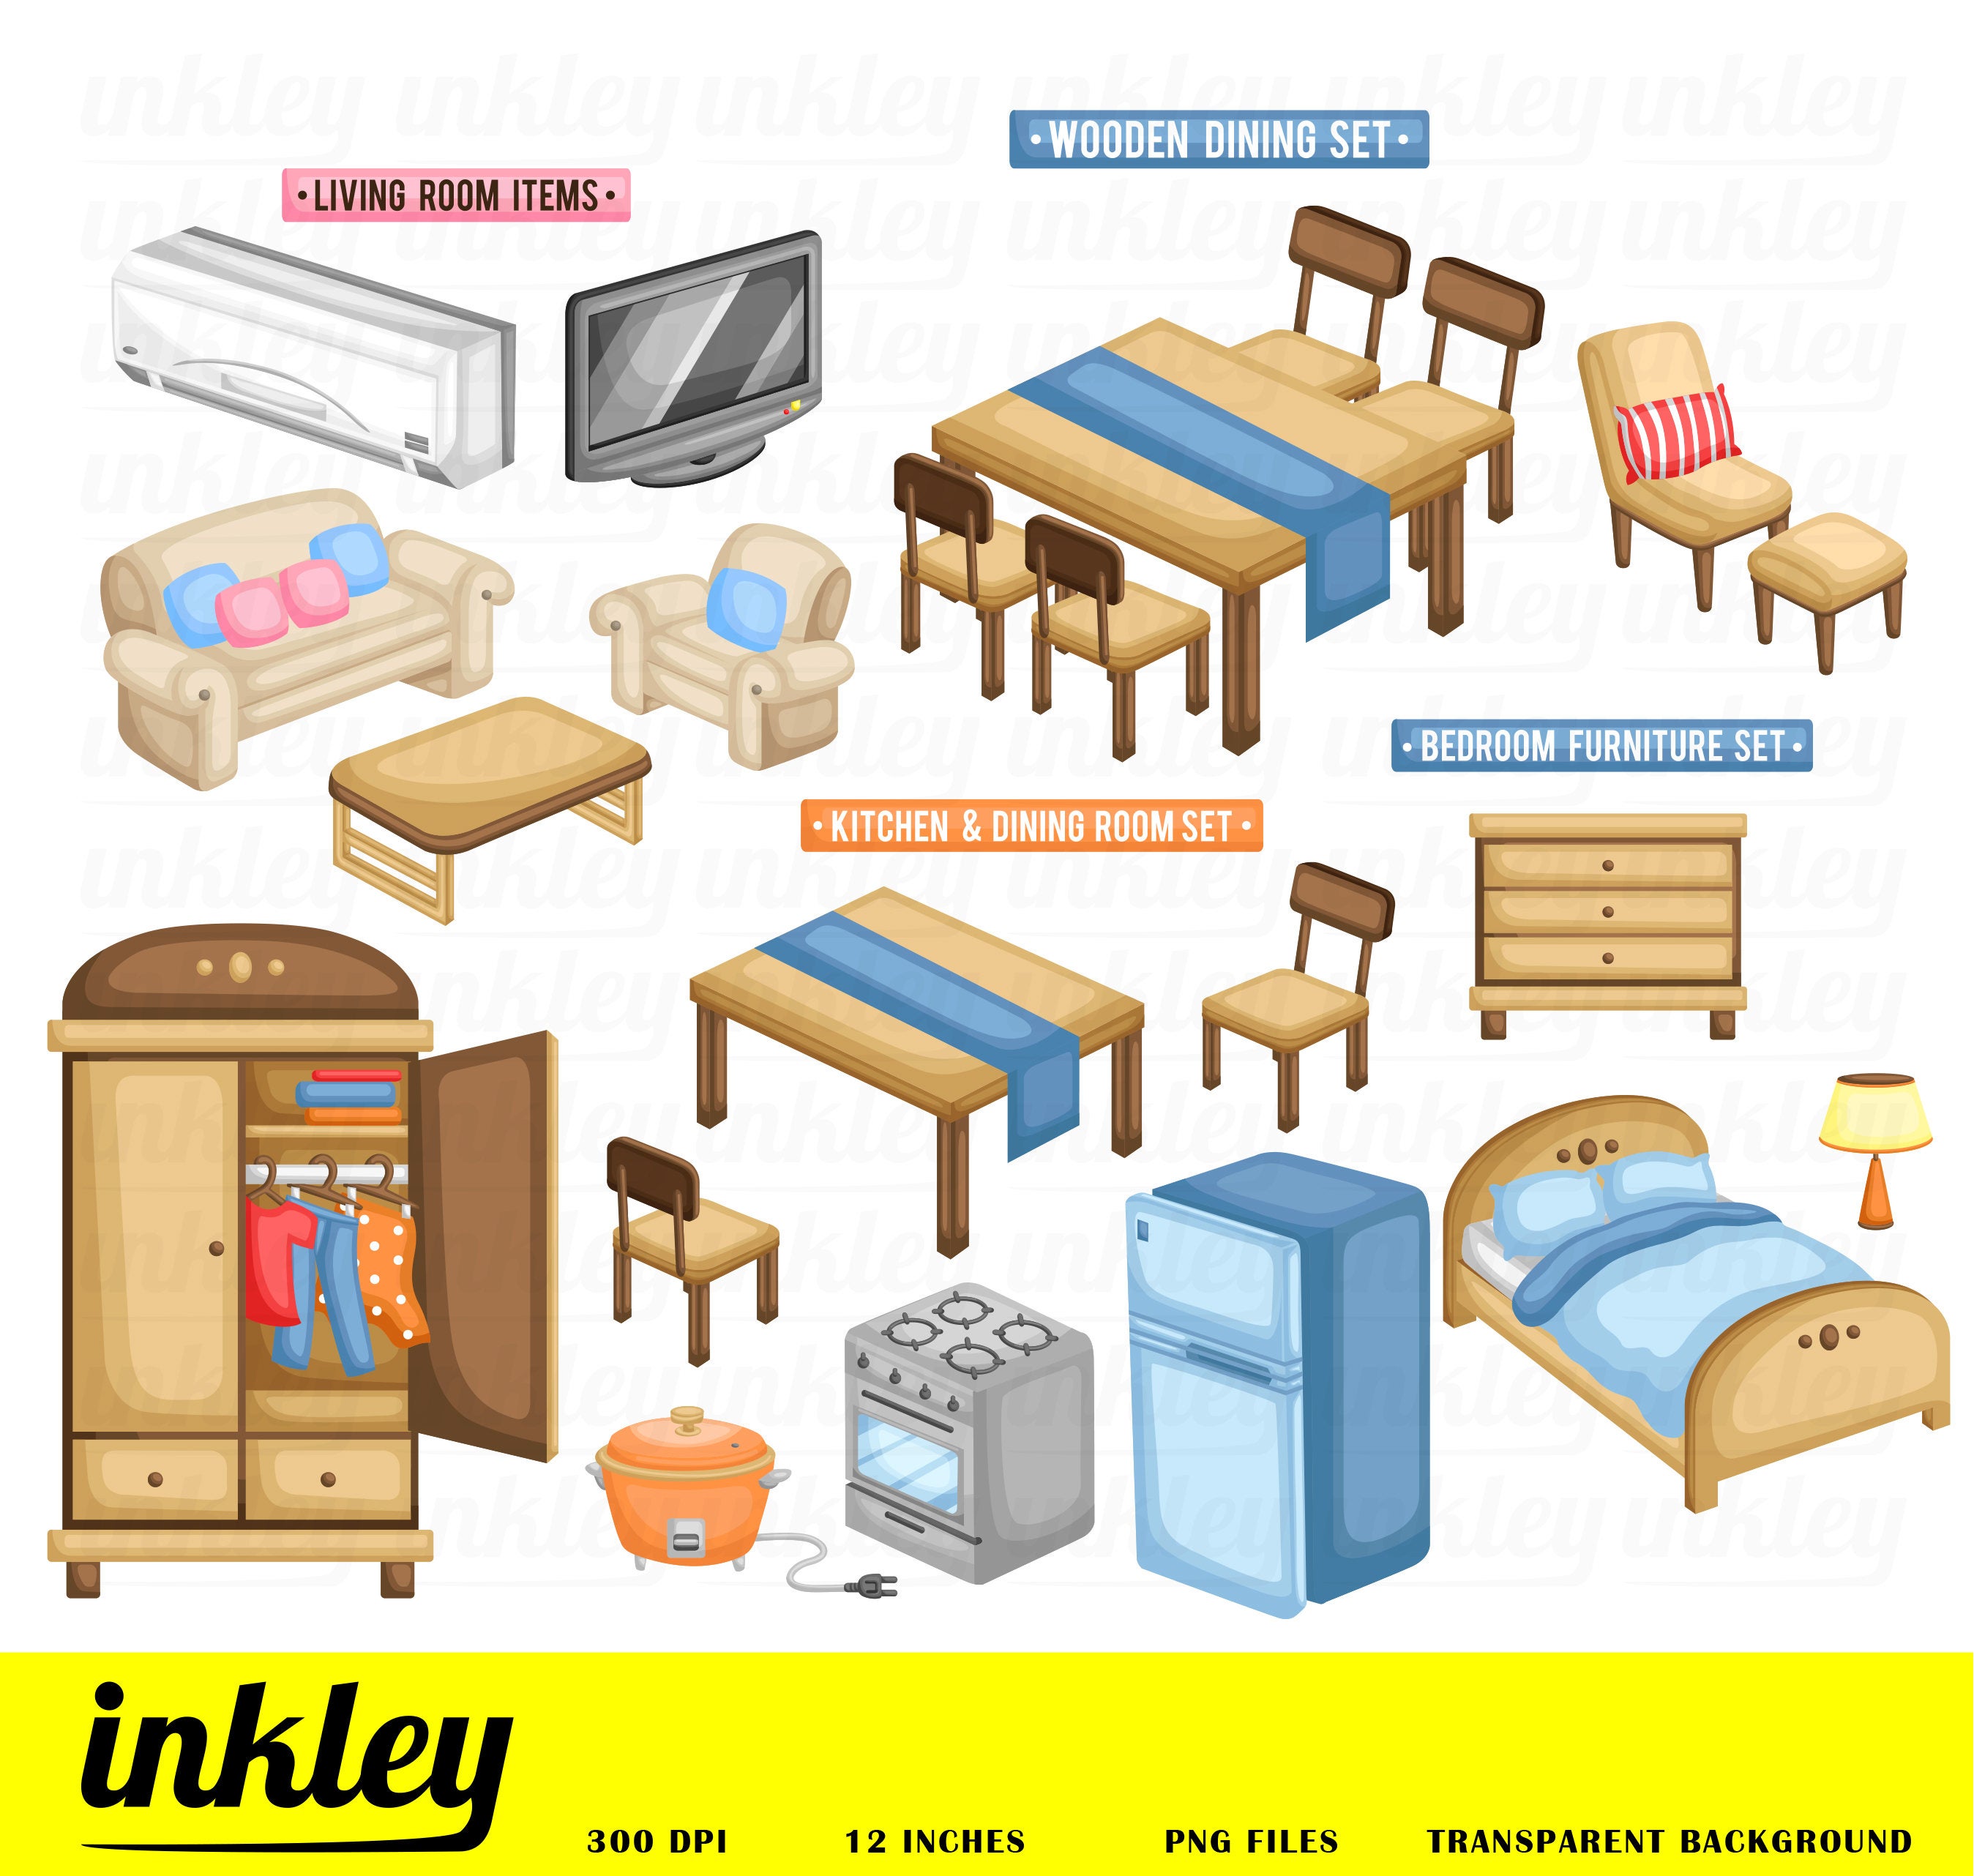 Furniture Clipart, Furniture Clip Art, Furniture Png, Television Clipart,  Cupboard Clipart, Cabinet Clipart, Bed Clipart, Table Clipart.